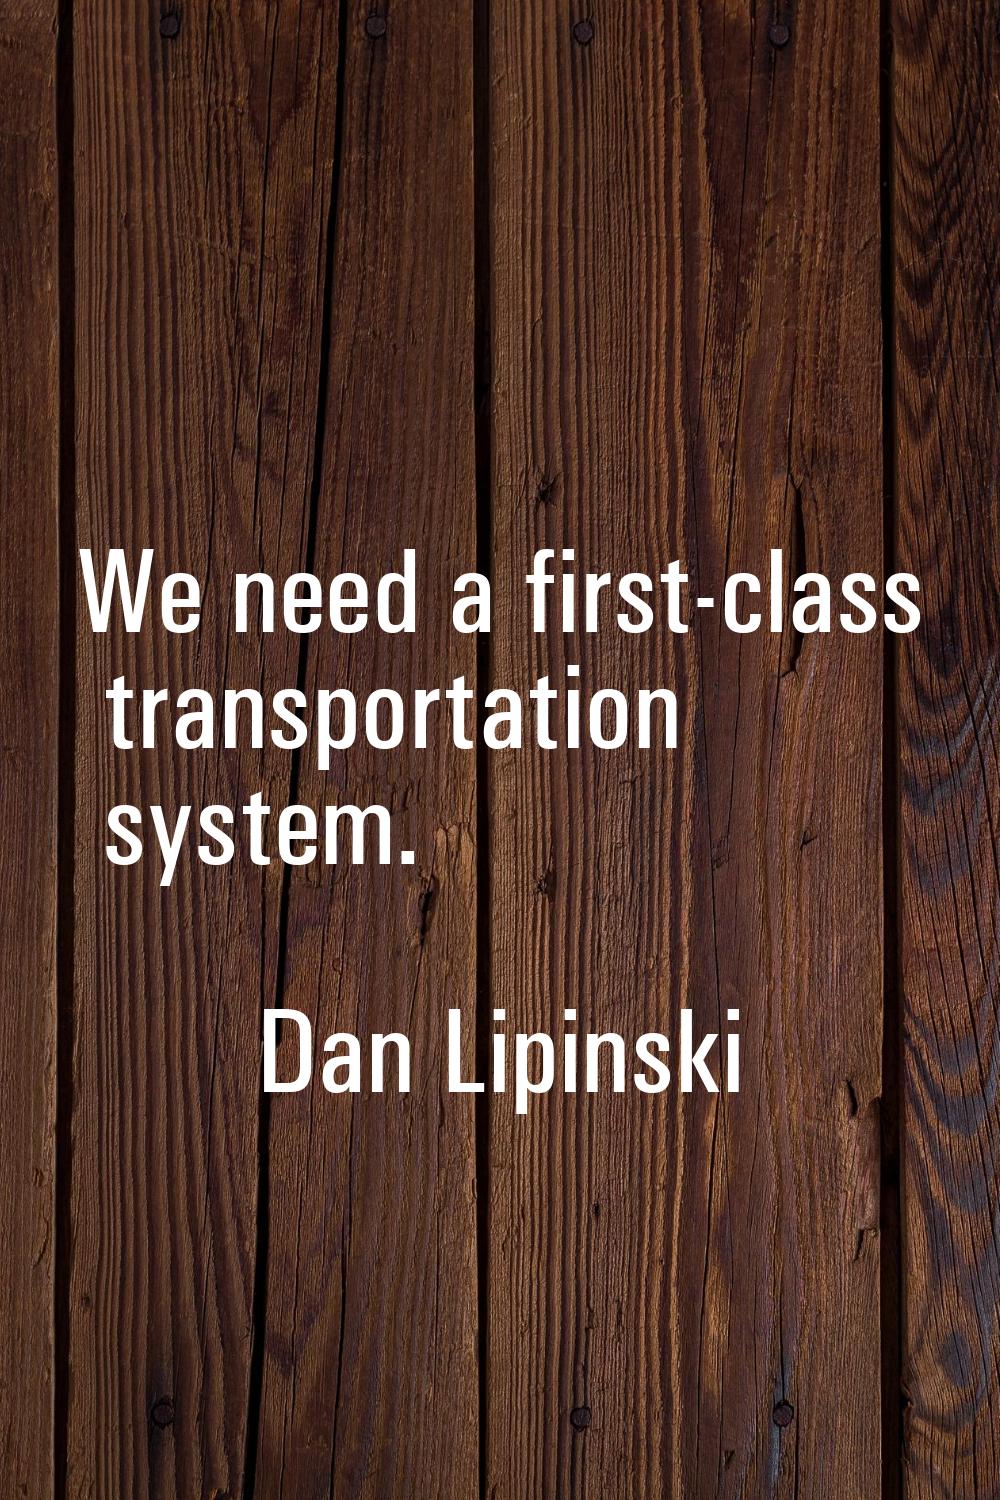 We need a first-class transportation system.